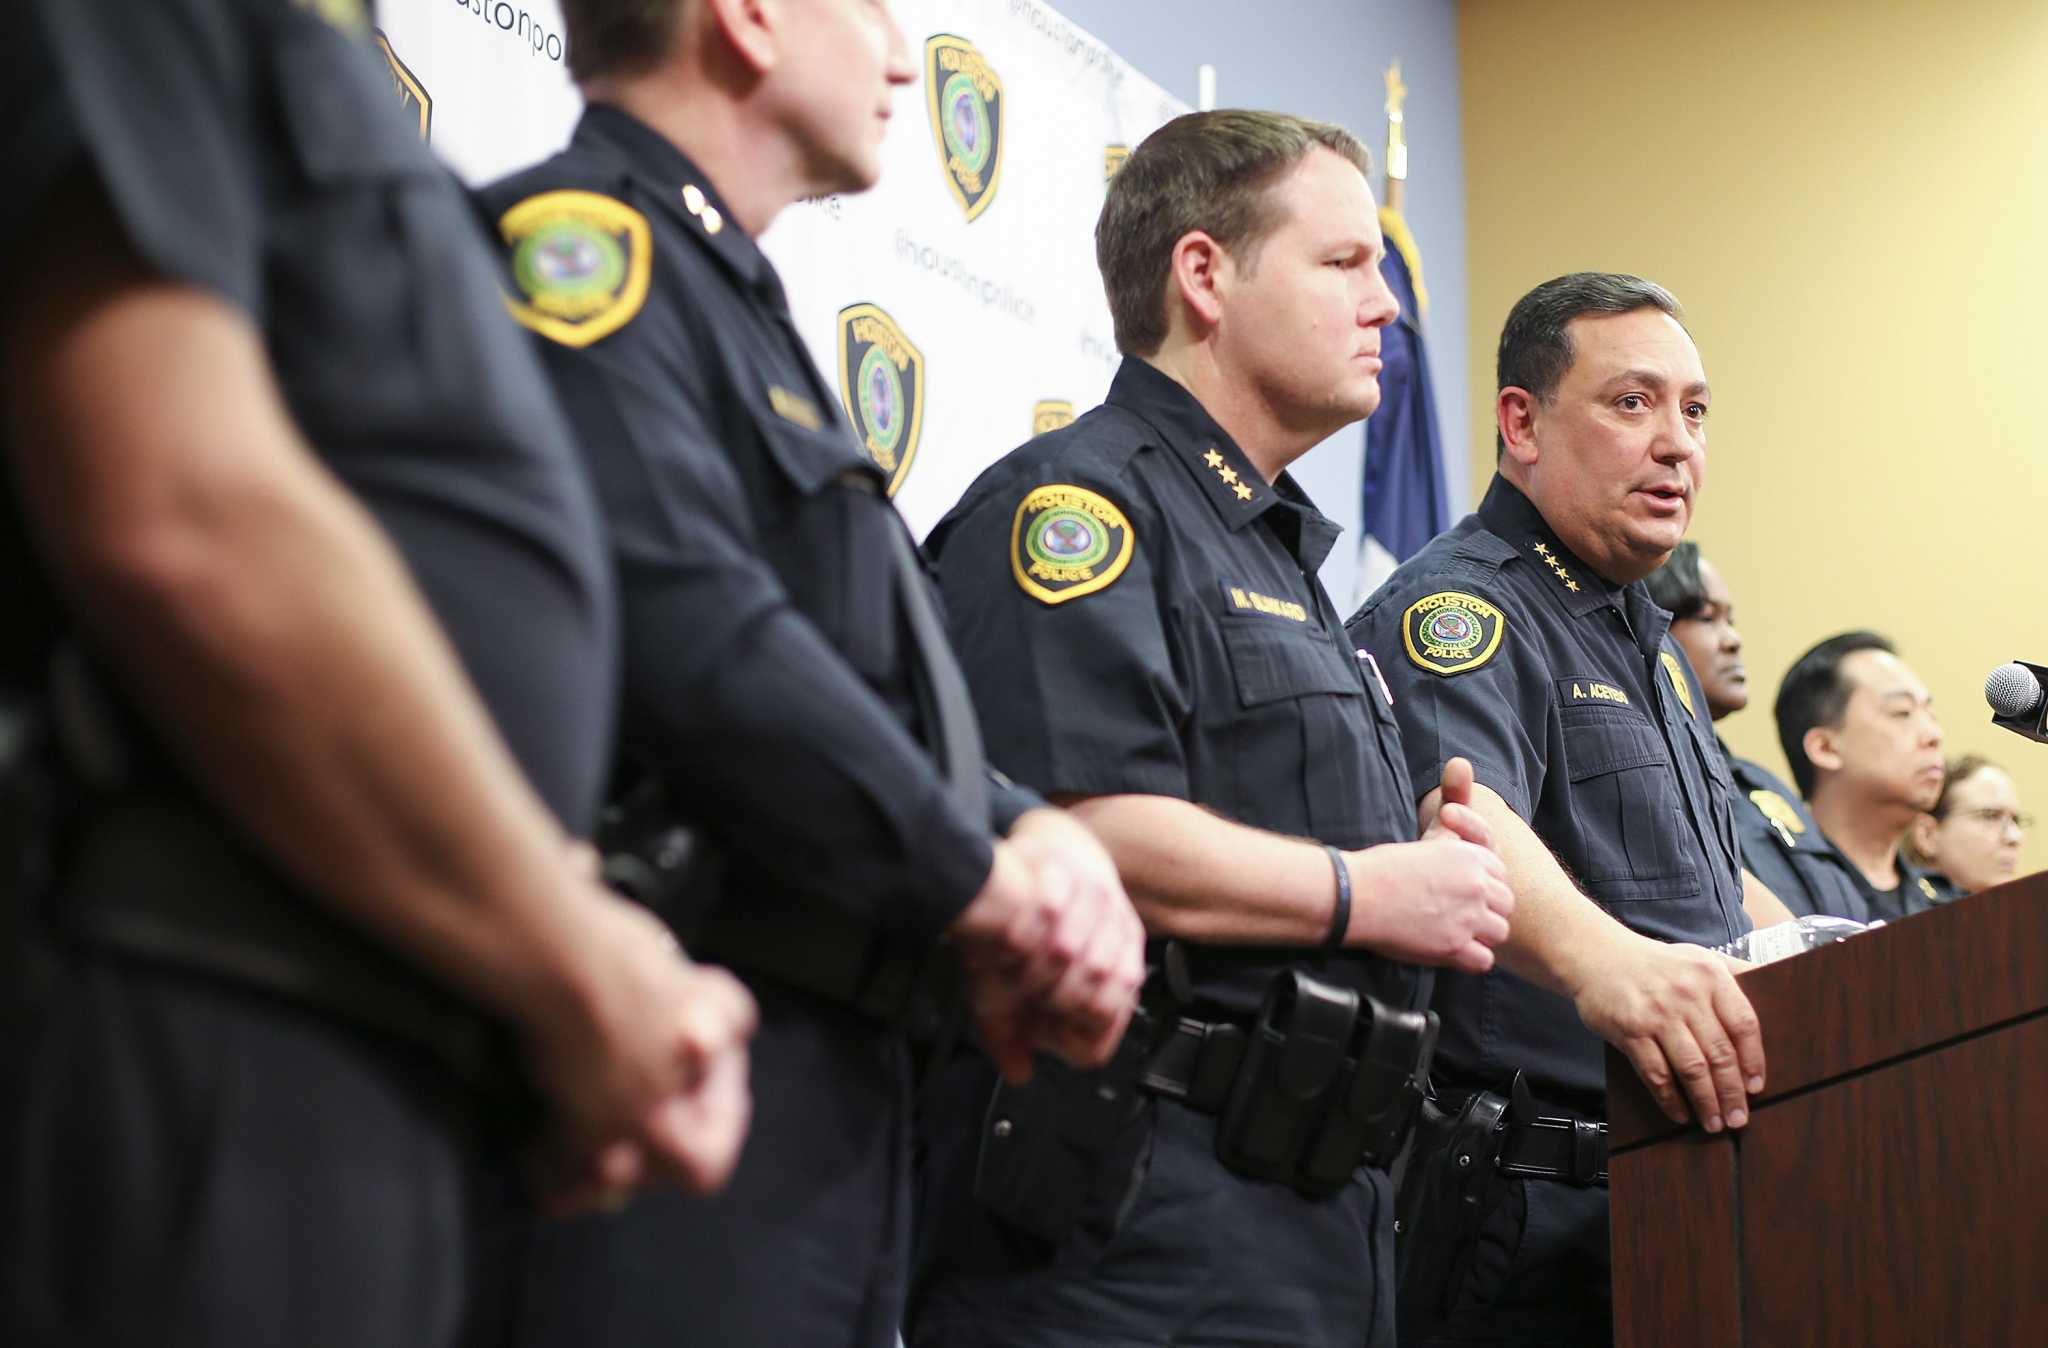 Houston police officer in drug raid had previous allegations against ...